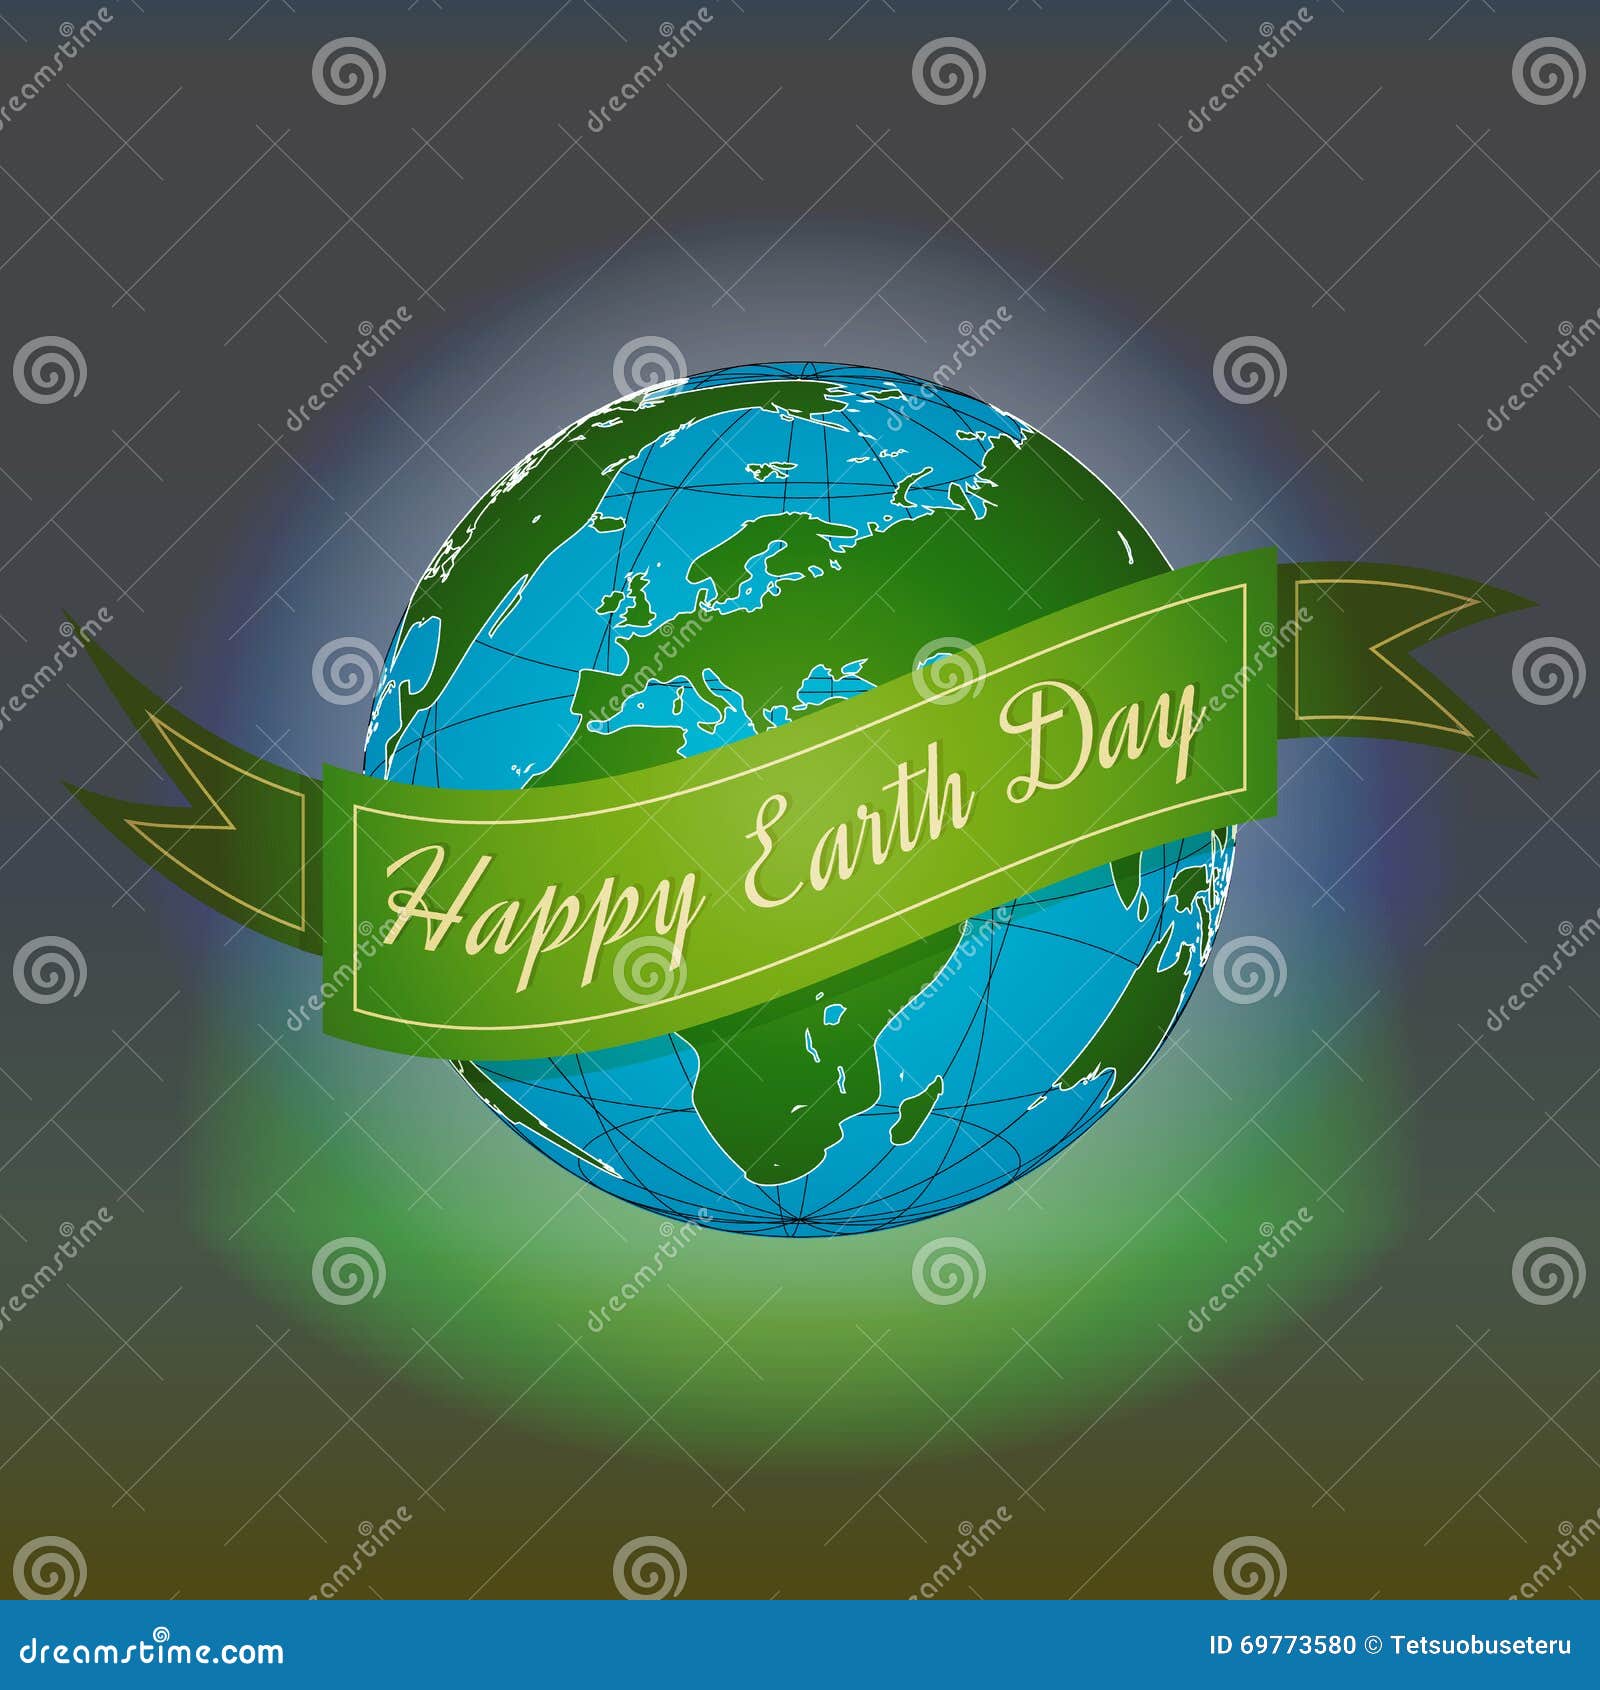 Earth day stock vector. Illustration of beauty, growth - 69773580